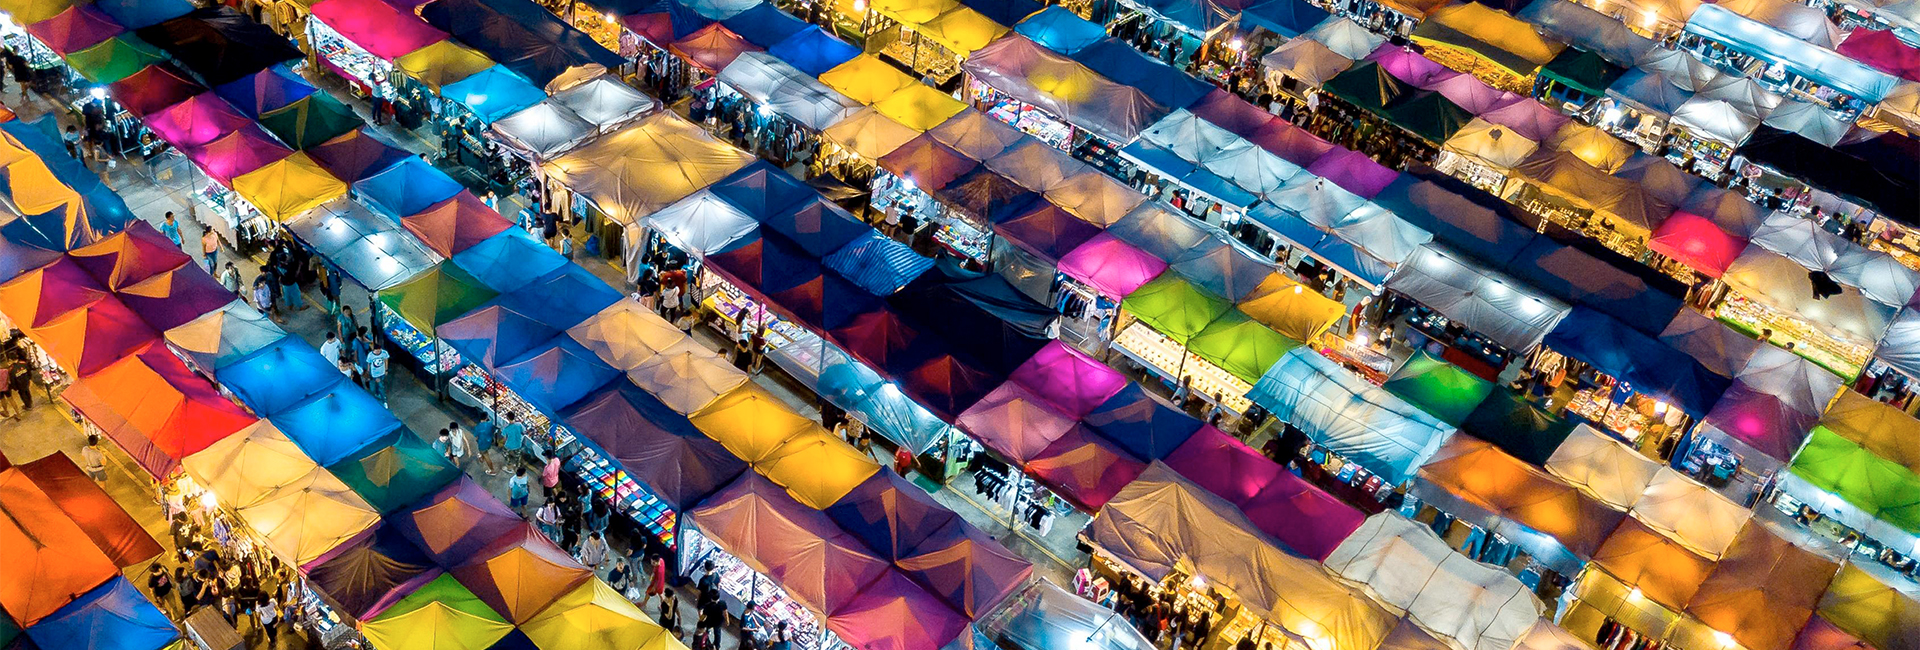 multicolored-marketplace-tents-night-time